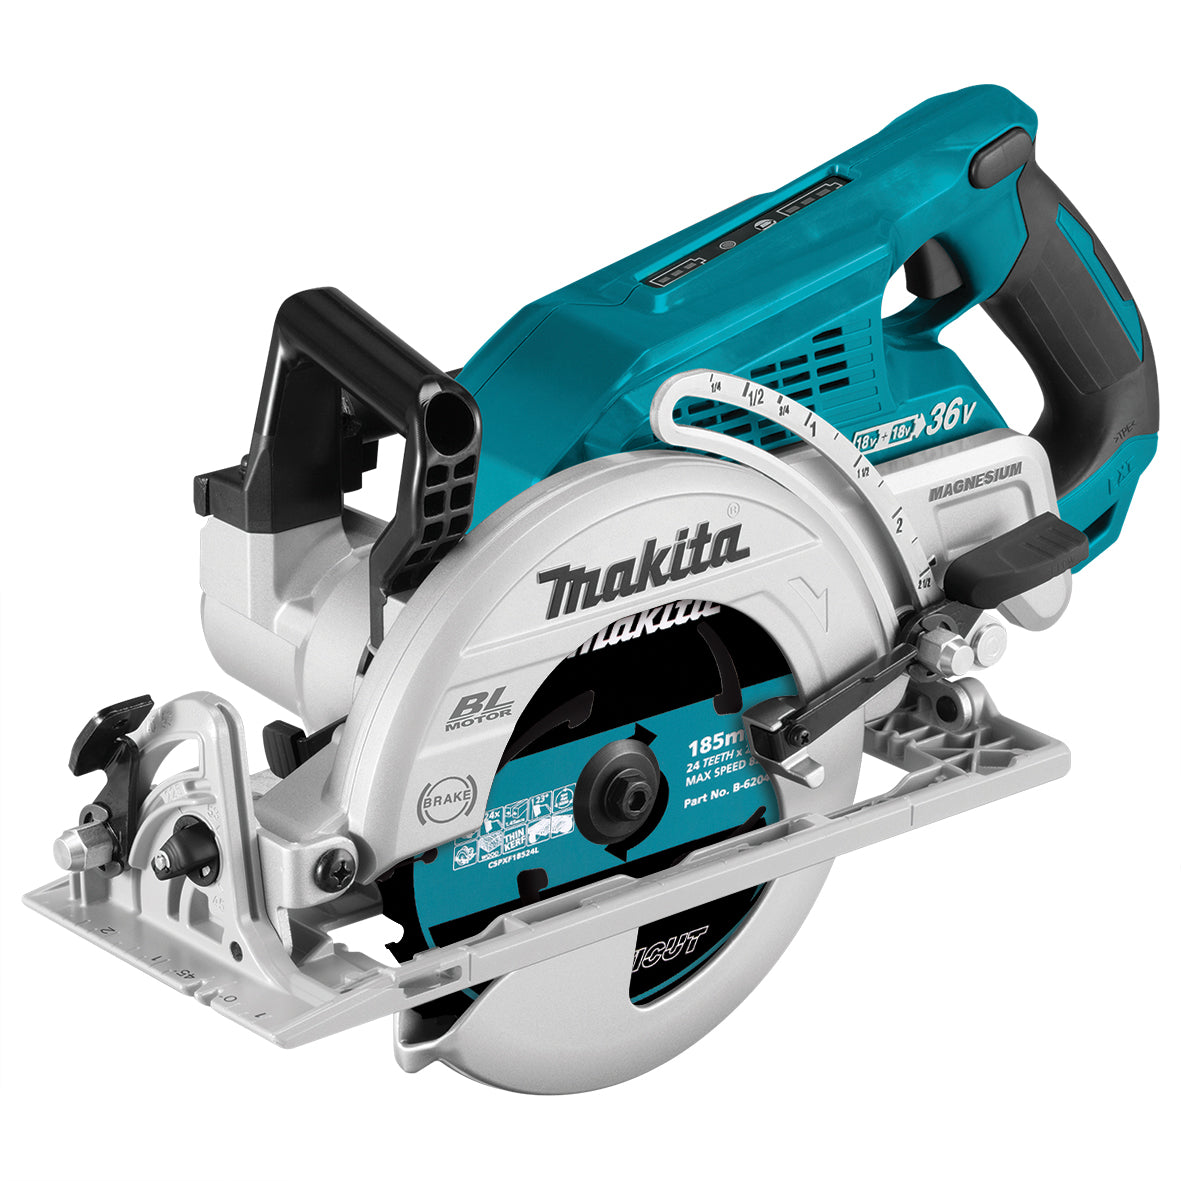 36V (18Vx2) 185mm Brushless Rear Handle Saw Bare (Tool Only) DRS780Z by Makita